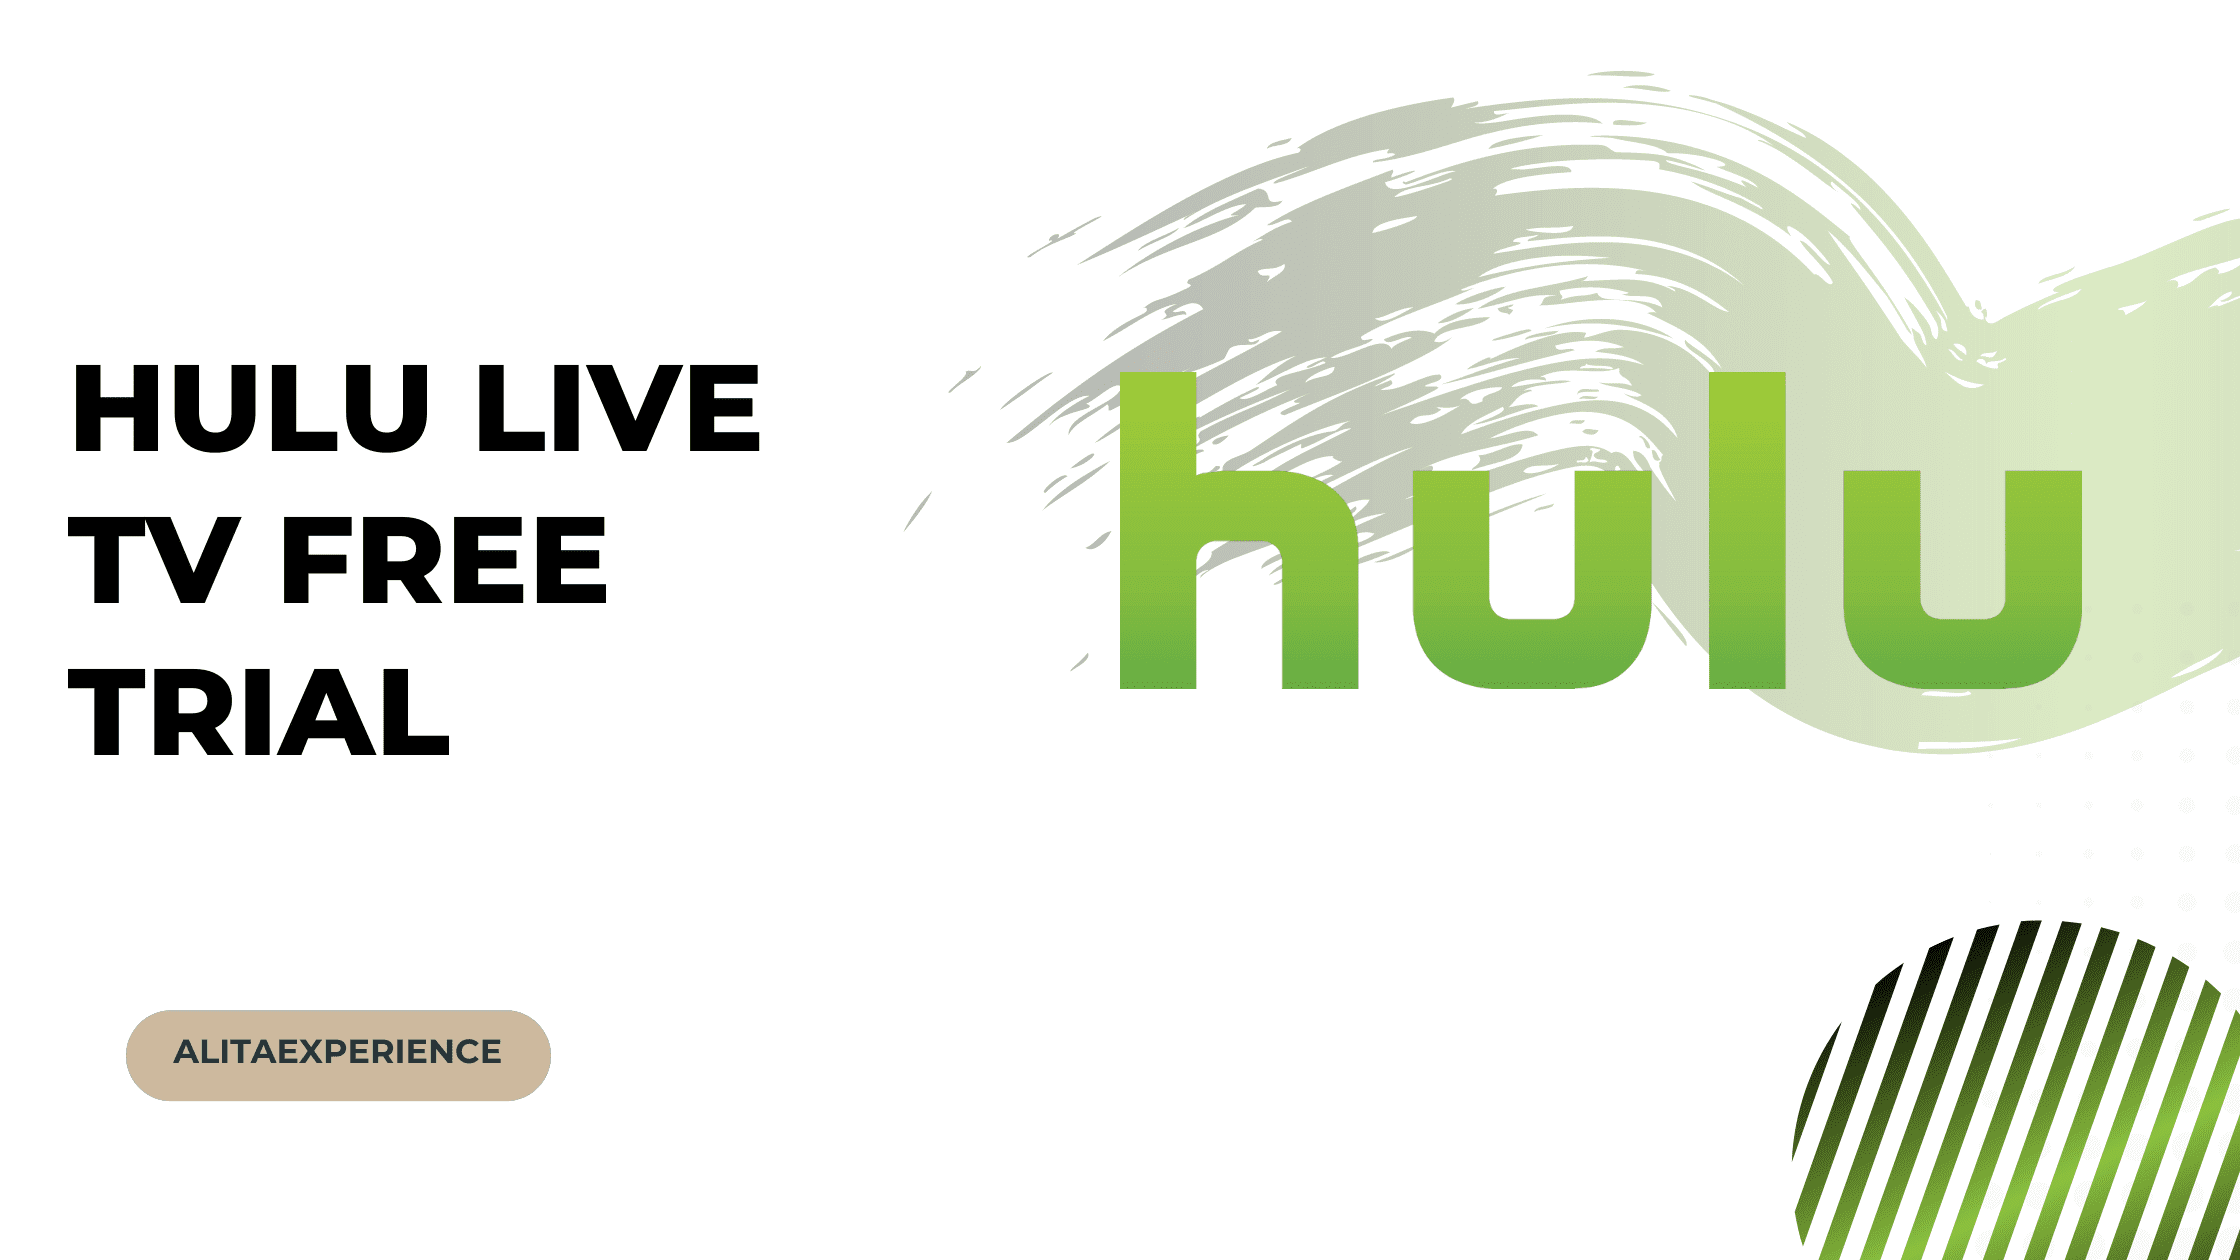 Hulu Live Tv Free Trial: Is It Available? (2023 Update)